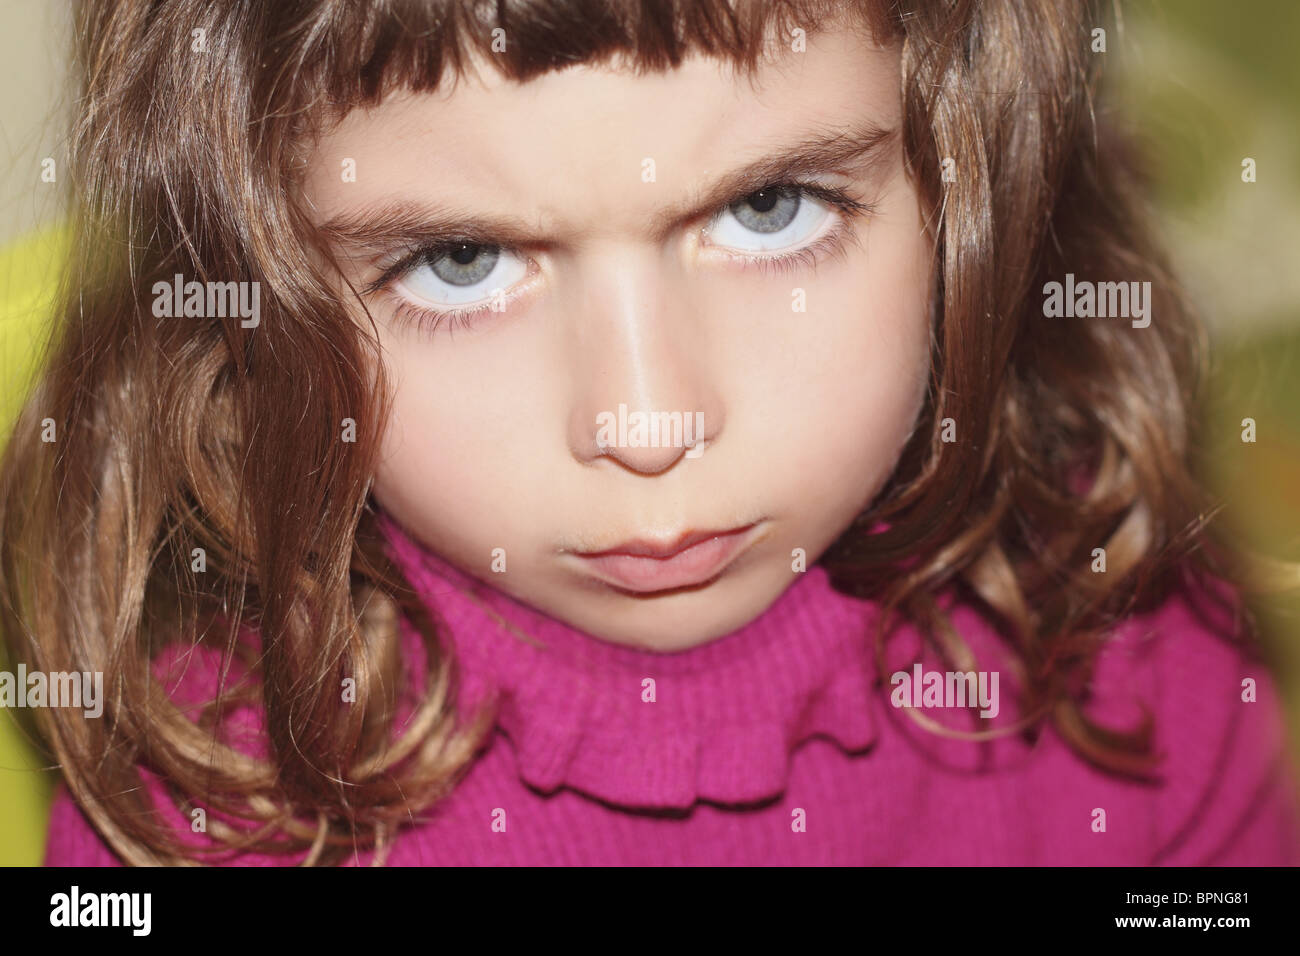 defy outface little girl portrait looking camera gesture blue eyes Stock Photo